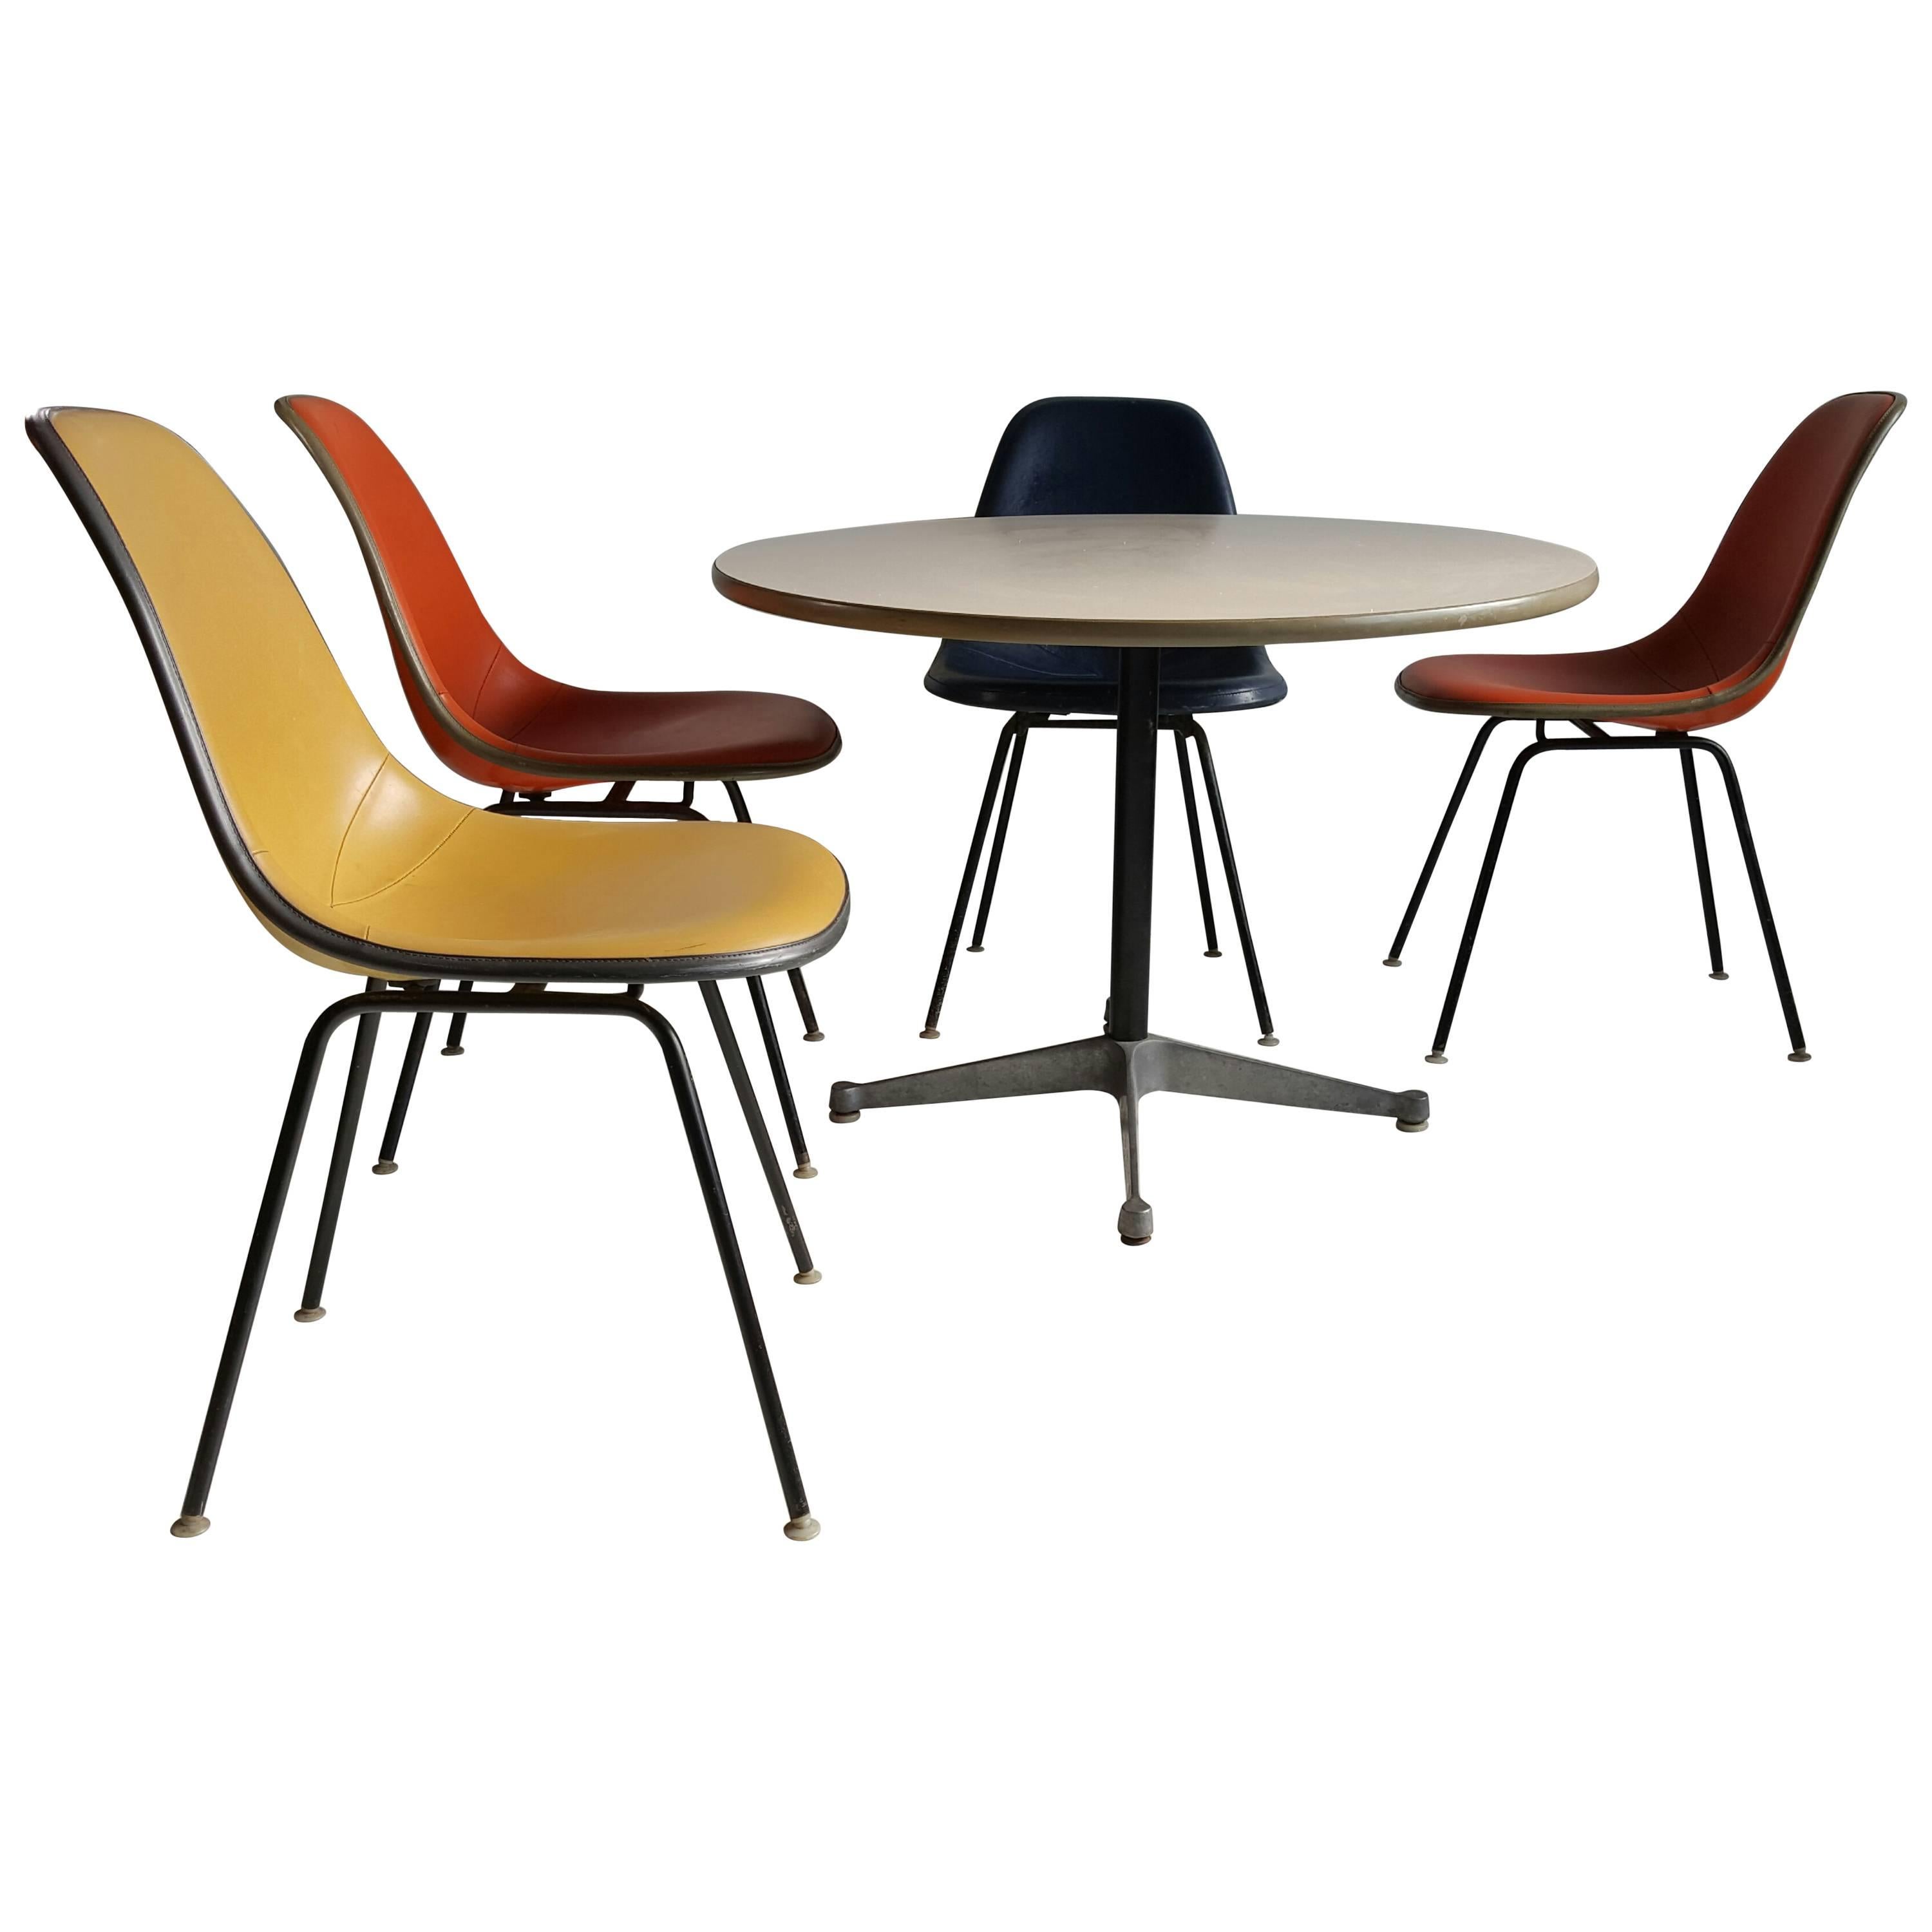 Classic Modern Dinette/Breakfast Set by Charles and Ray Eames, Herman Miller